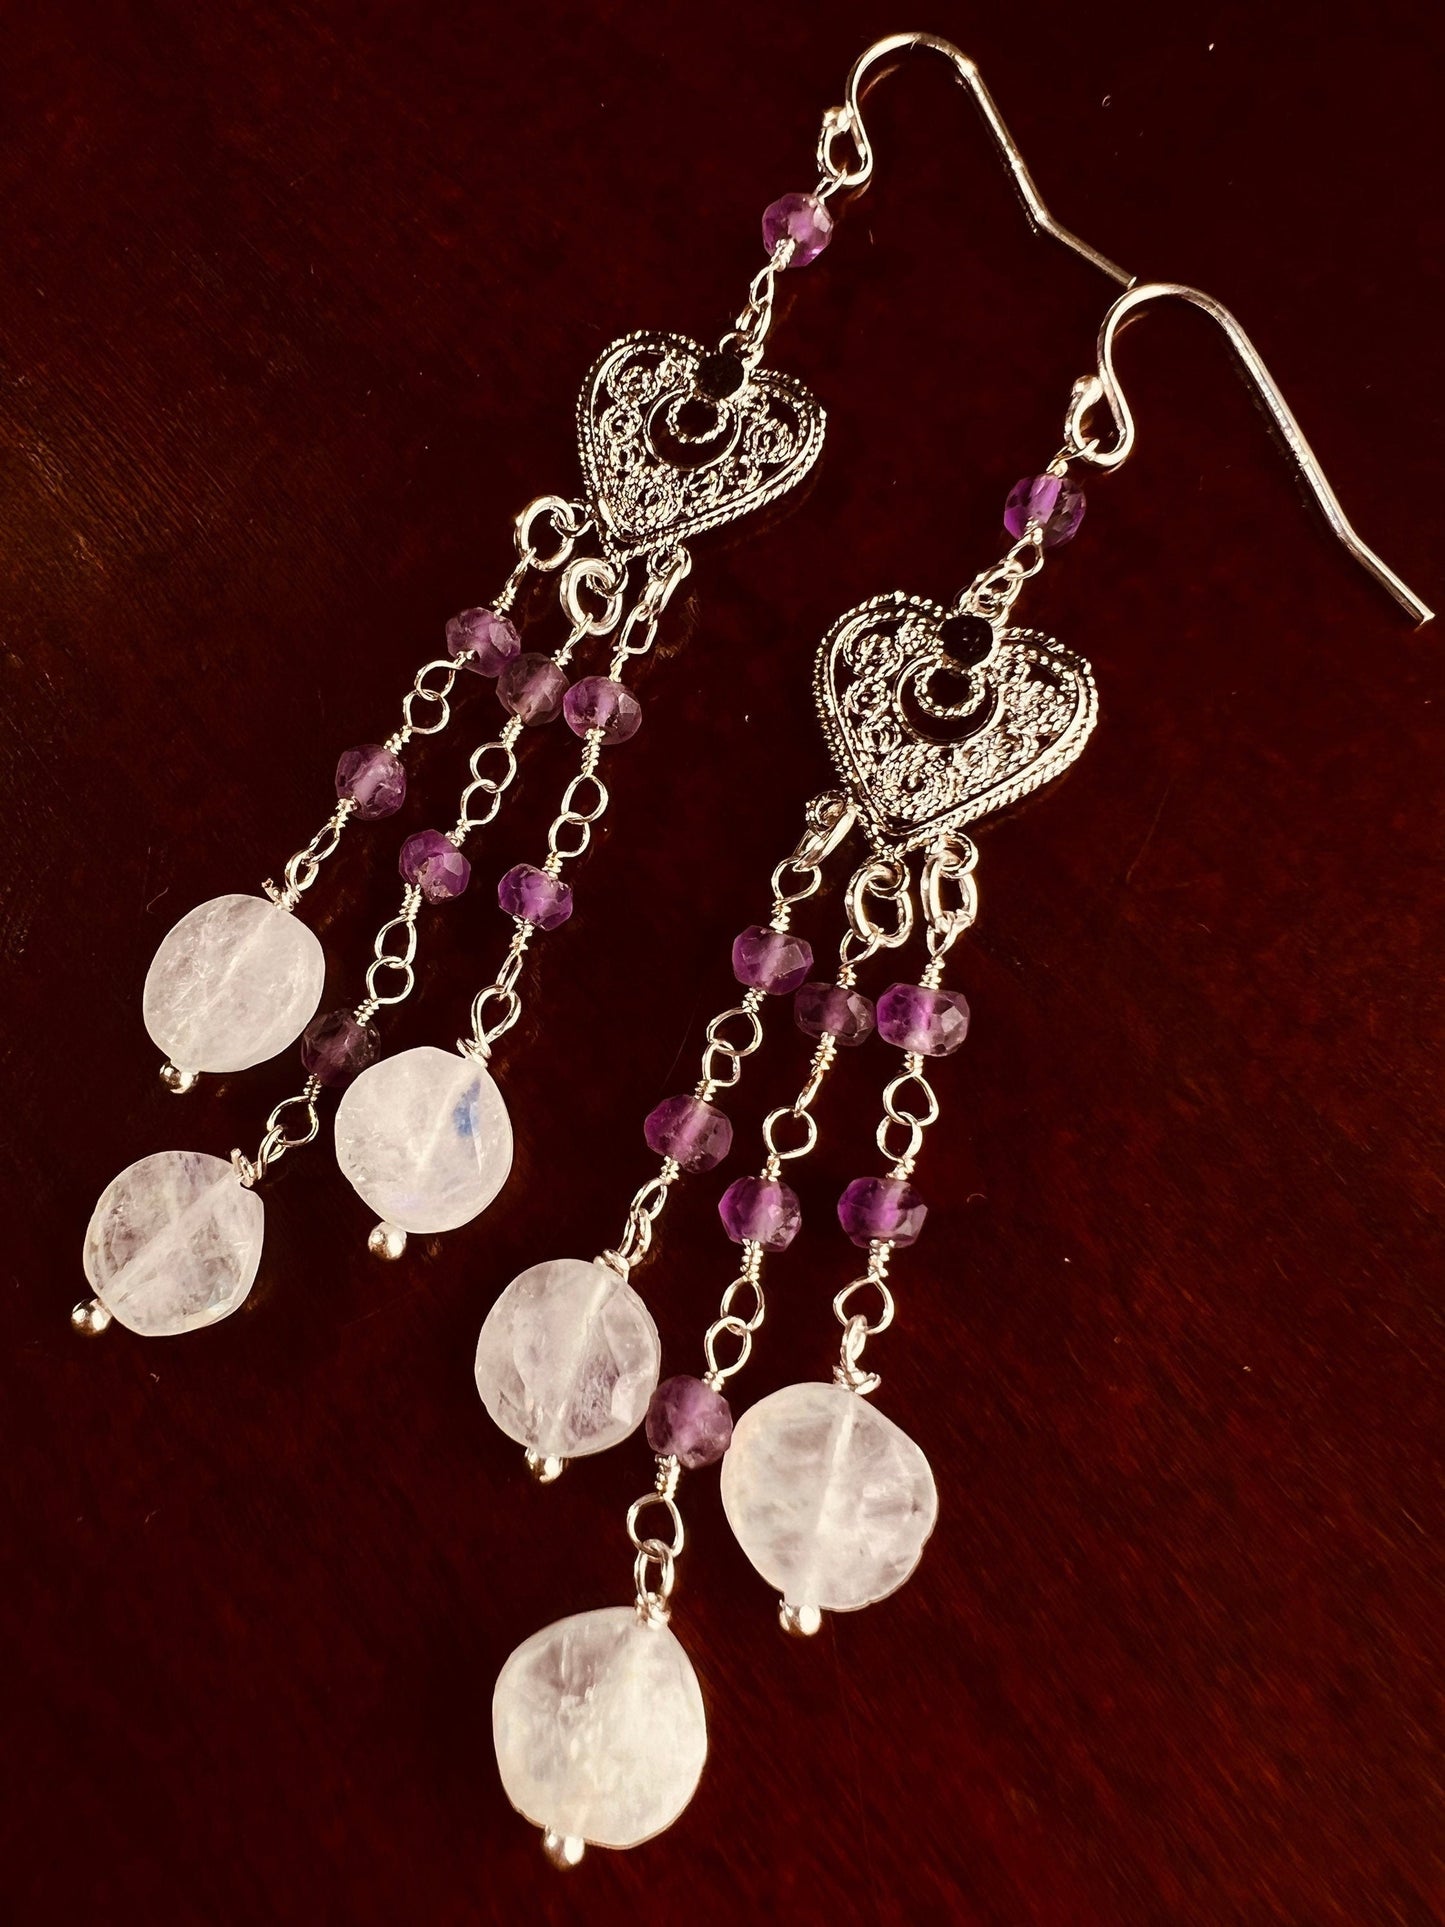 Natural Moonstone Dangling with Natural Amethyst Filigree Chandelier Wire Wrapped 925 Sterling Silver Earrings, Handmade Gift for Her